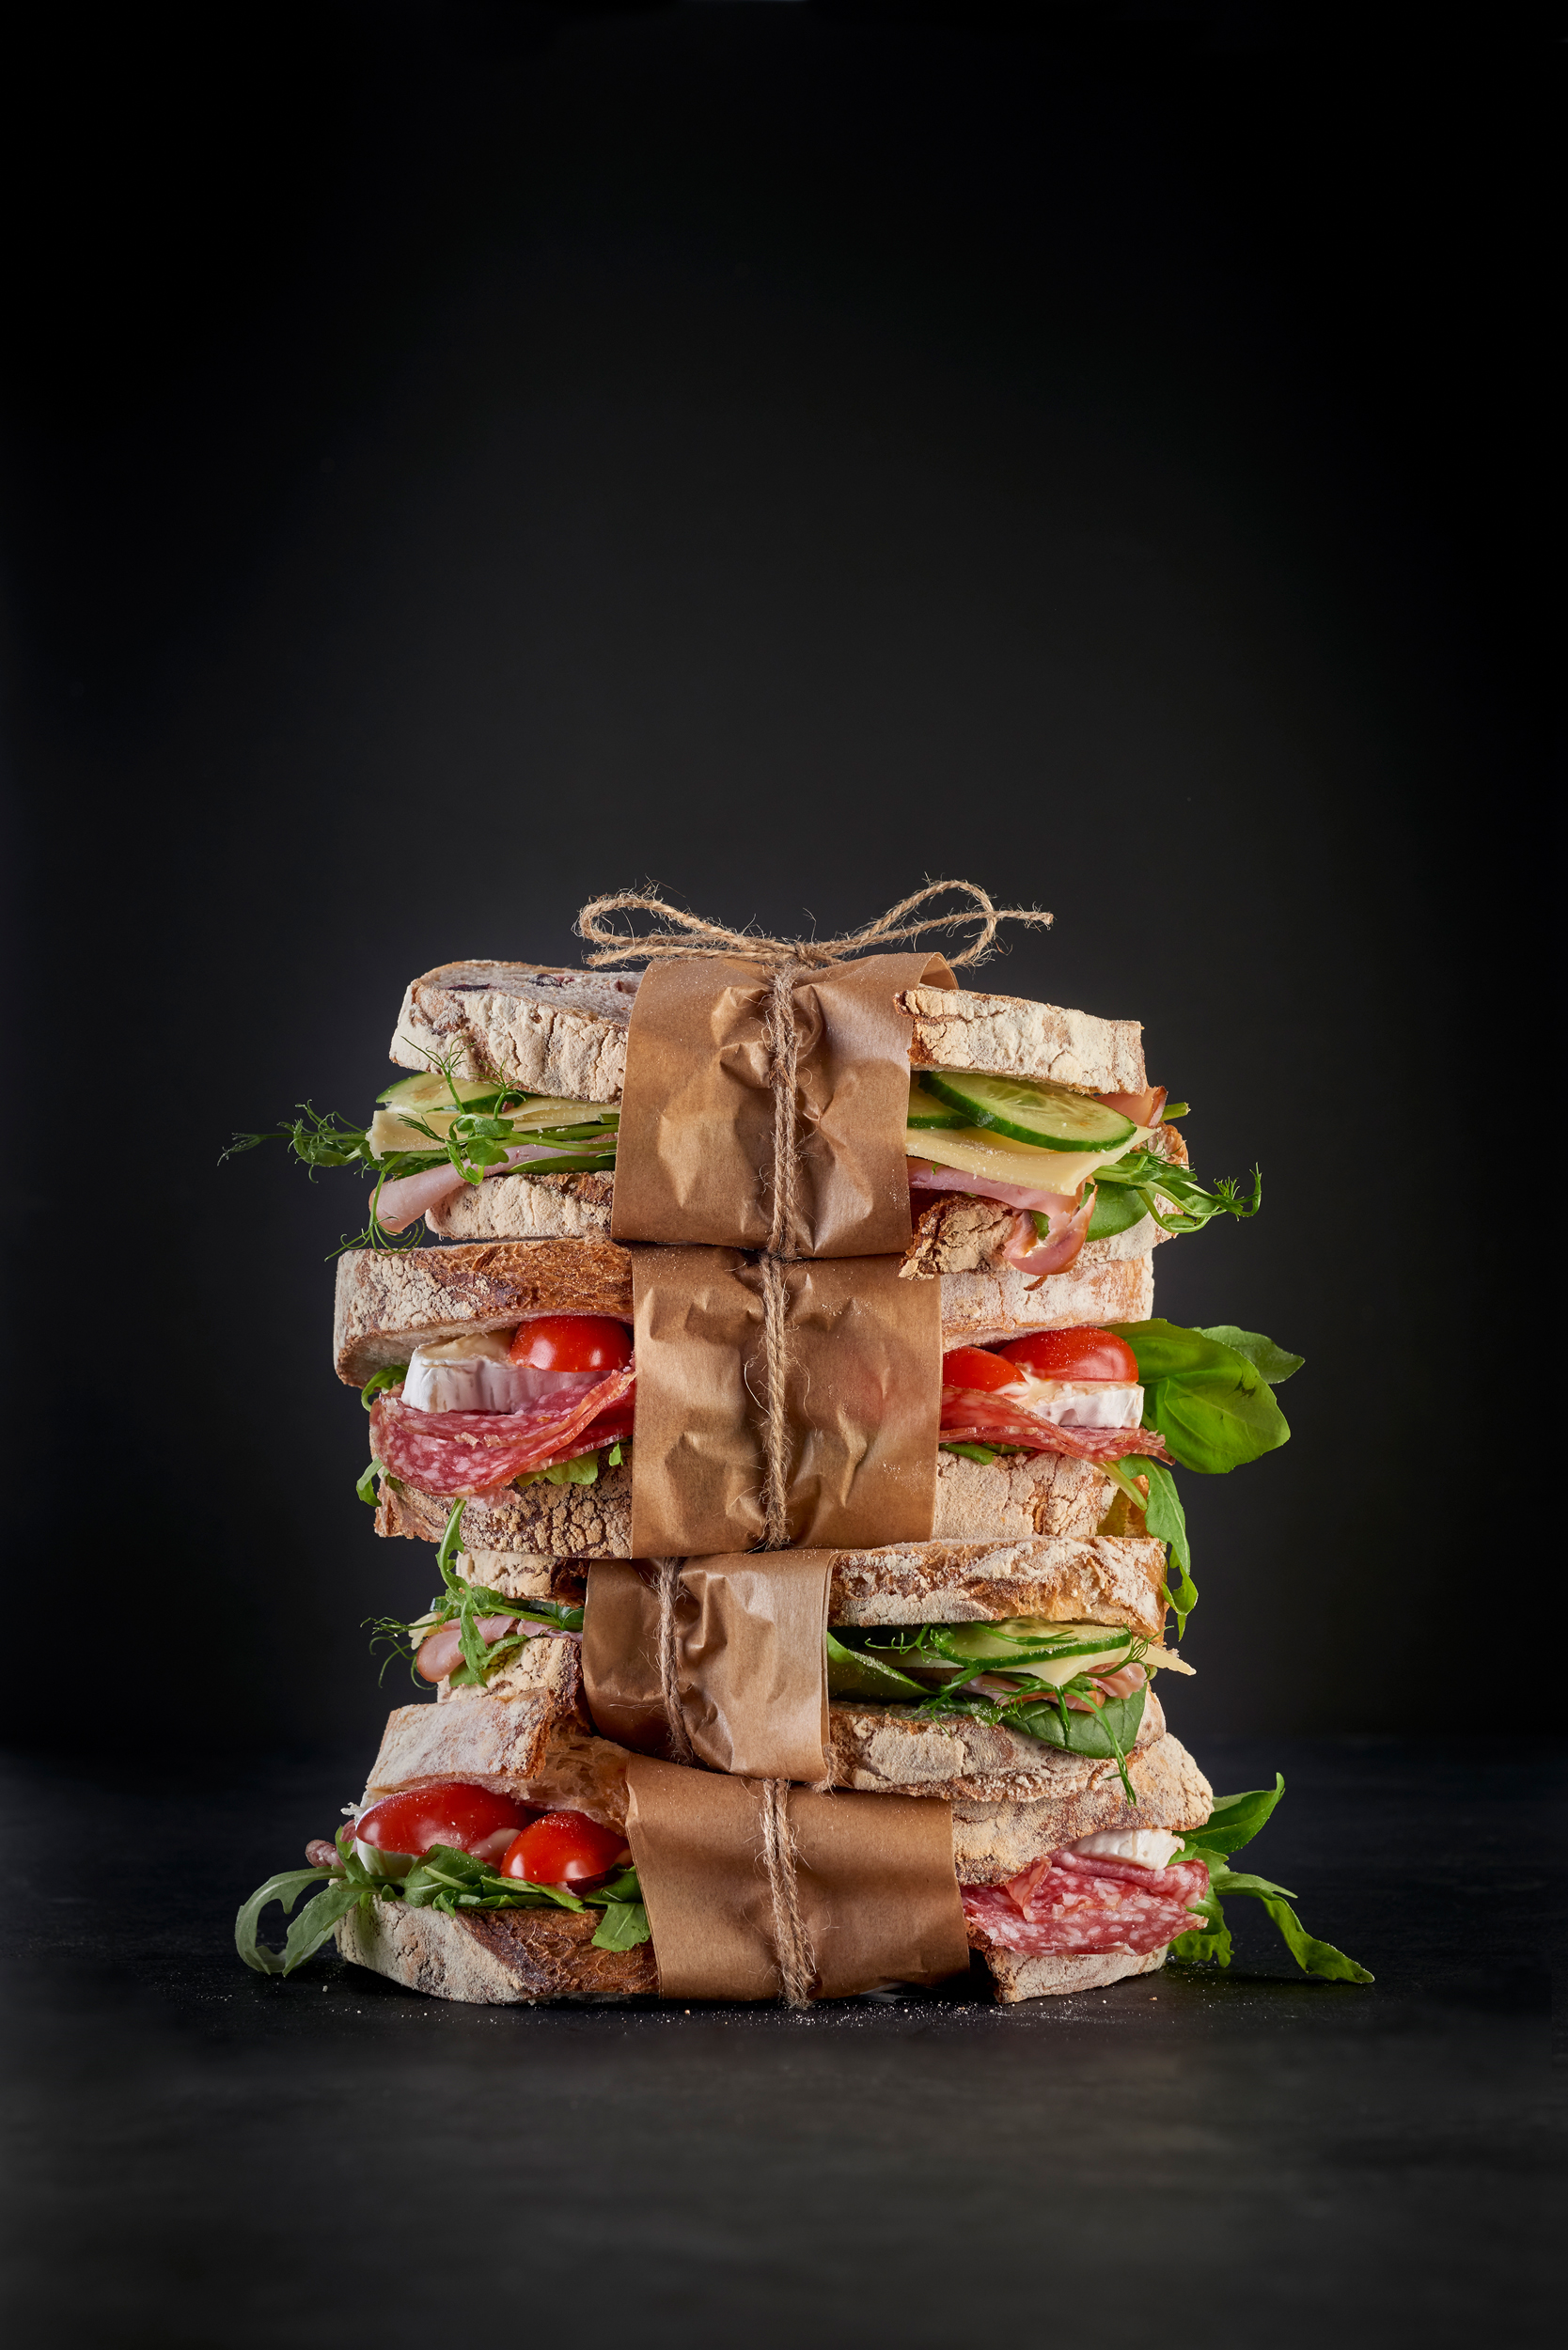 A stack of sandwiches